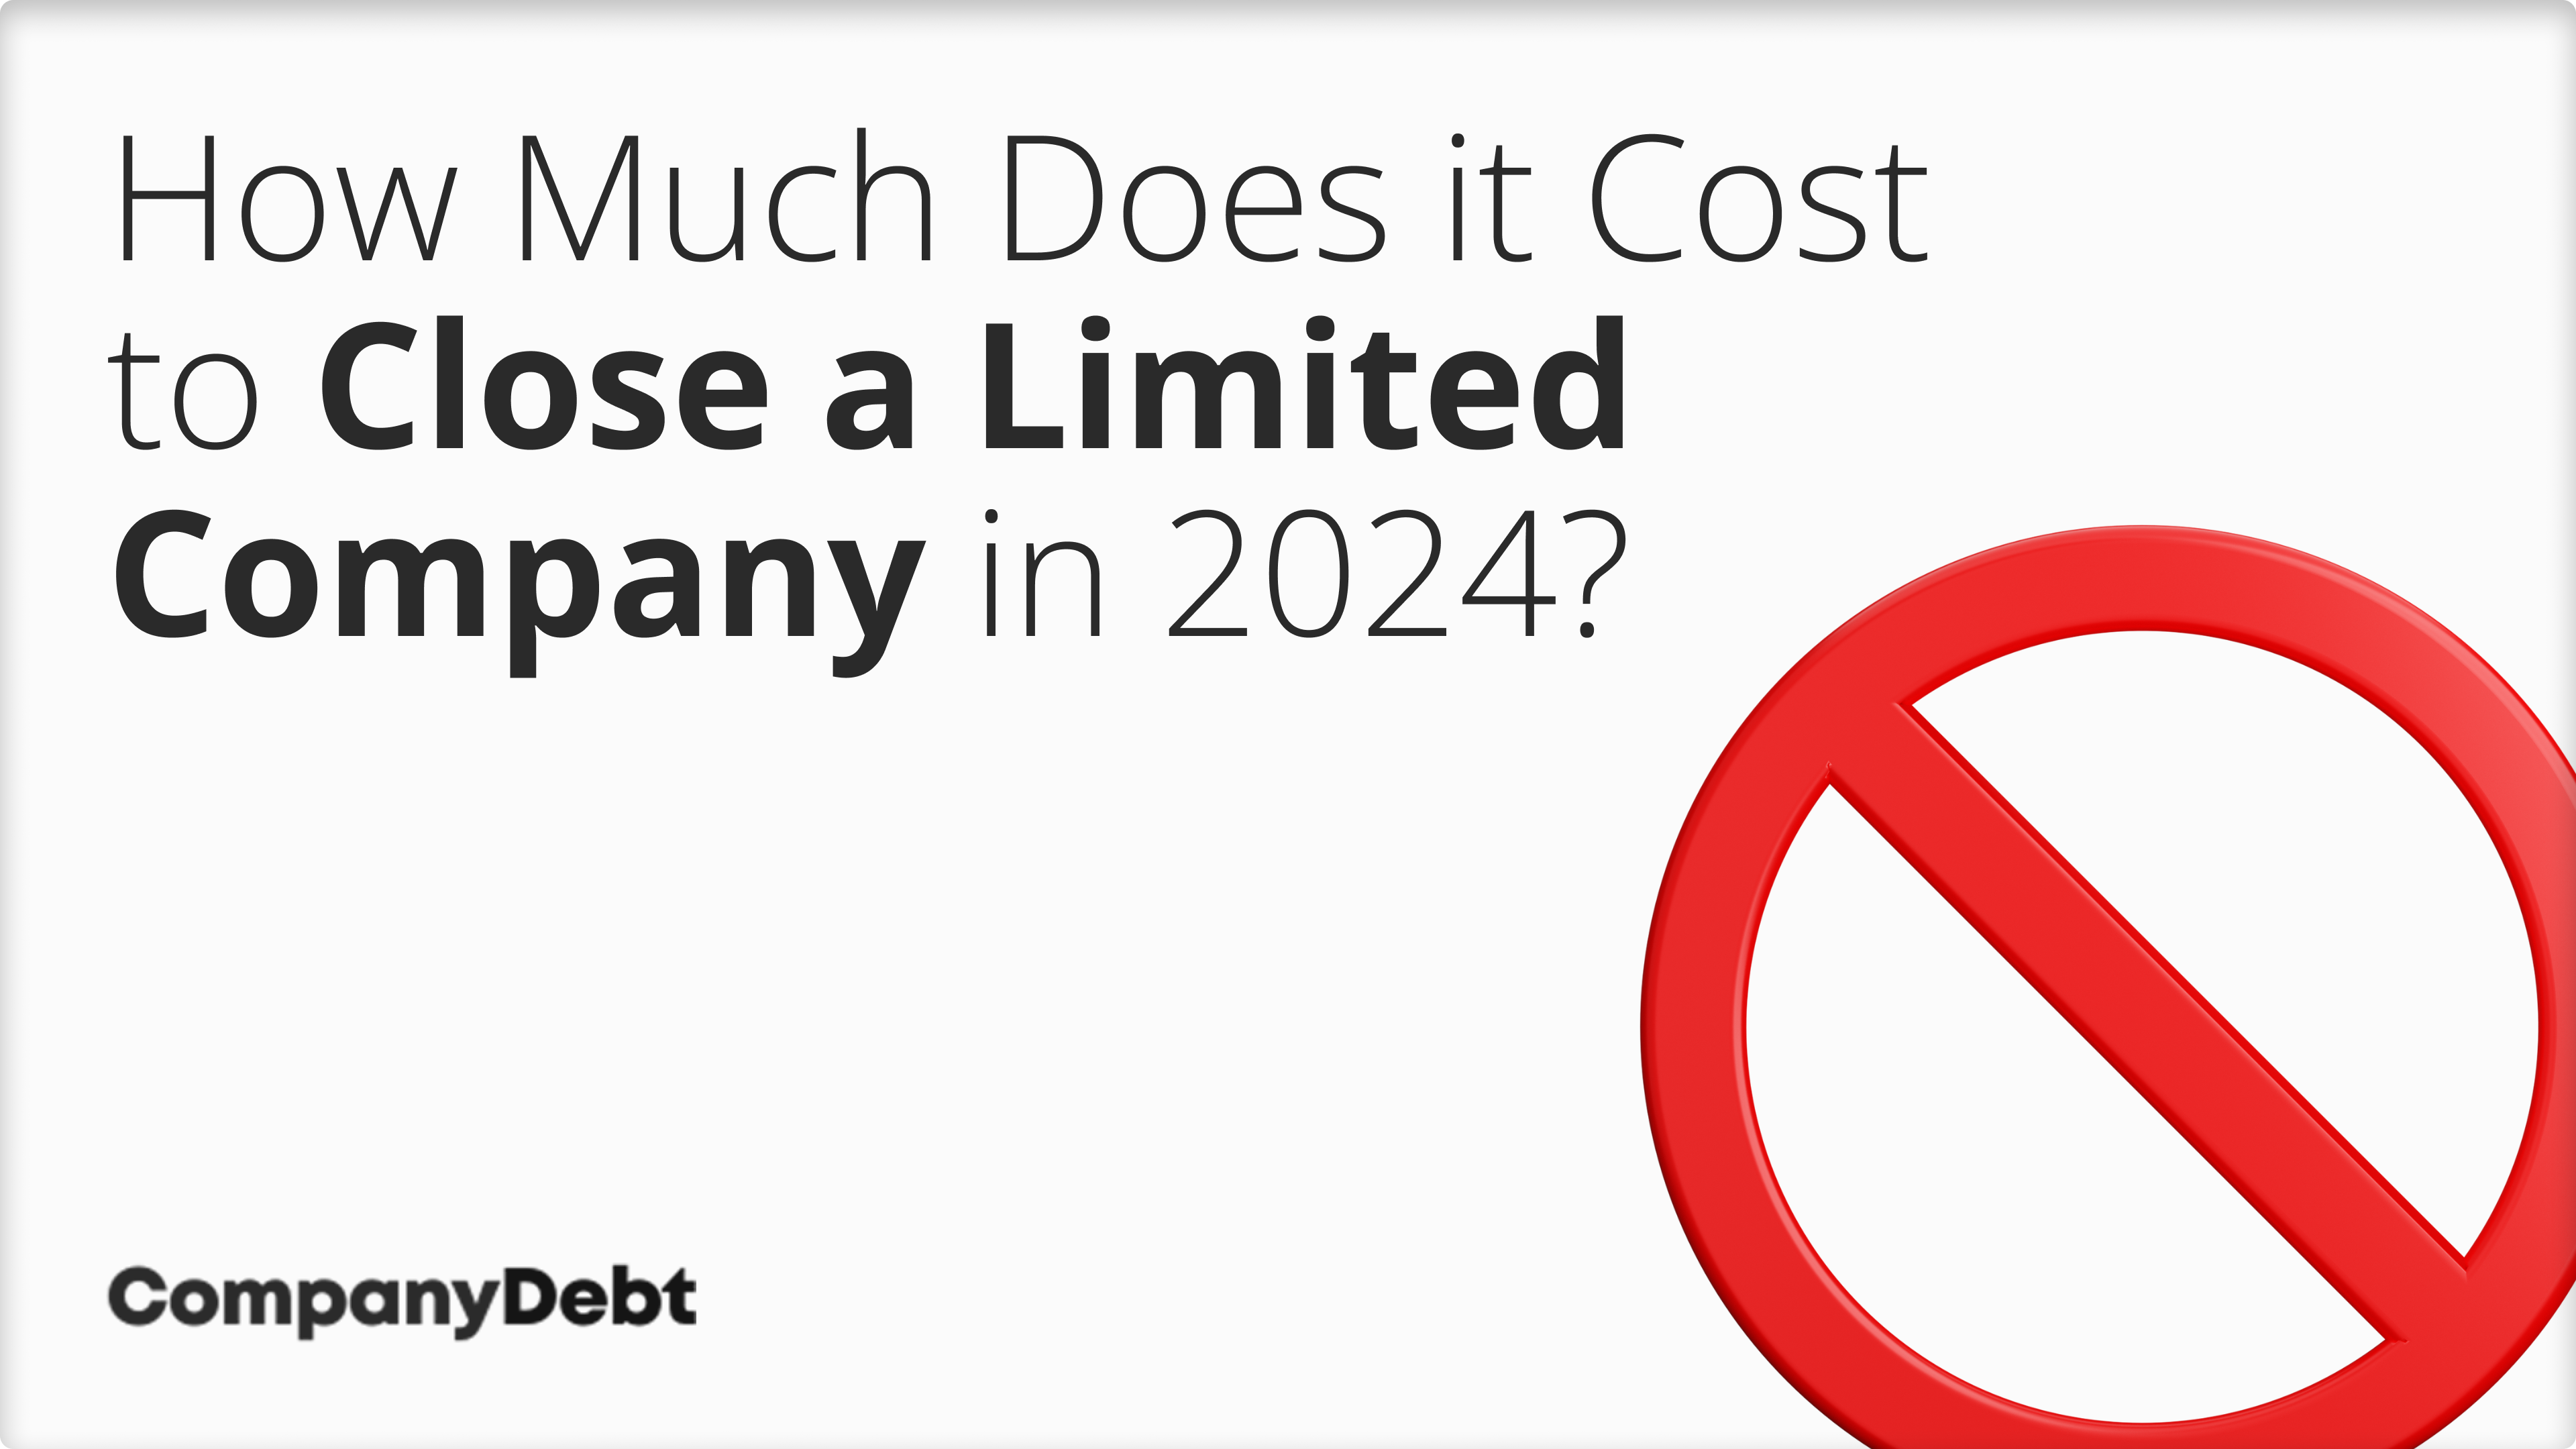 How-Much-Does-it-Cost-to-Close-a-Limited-Company-in-2024_